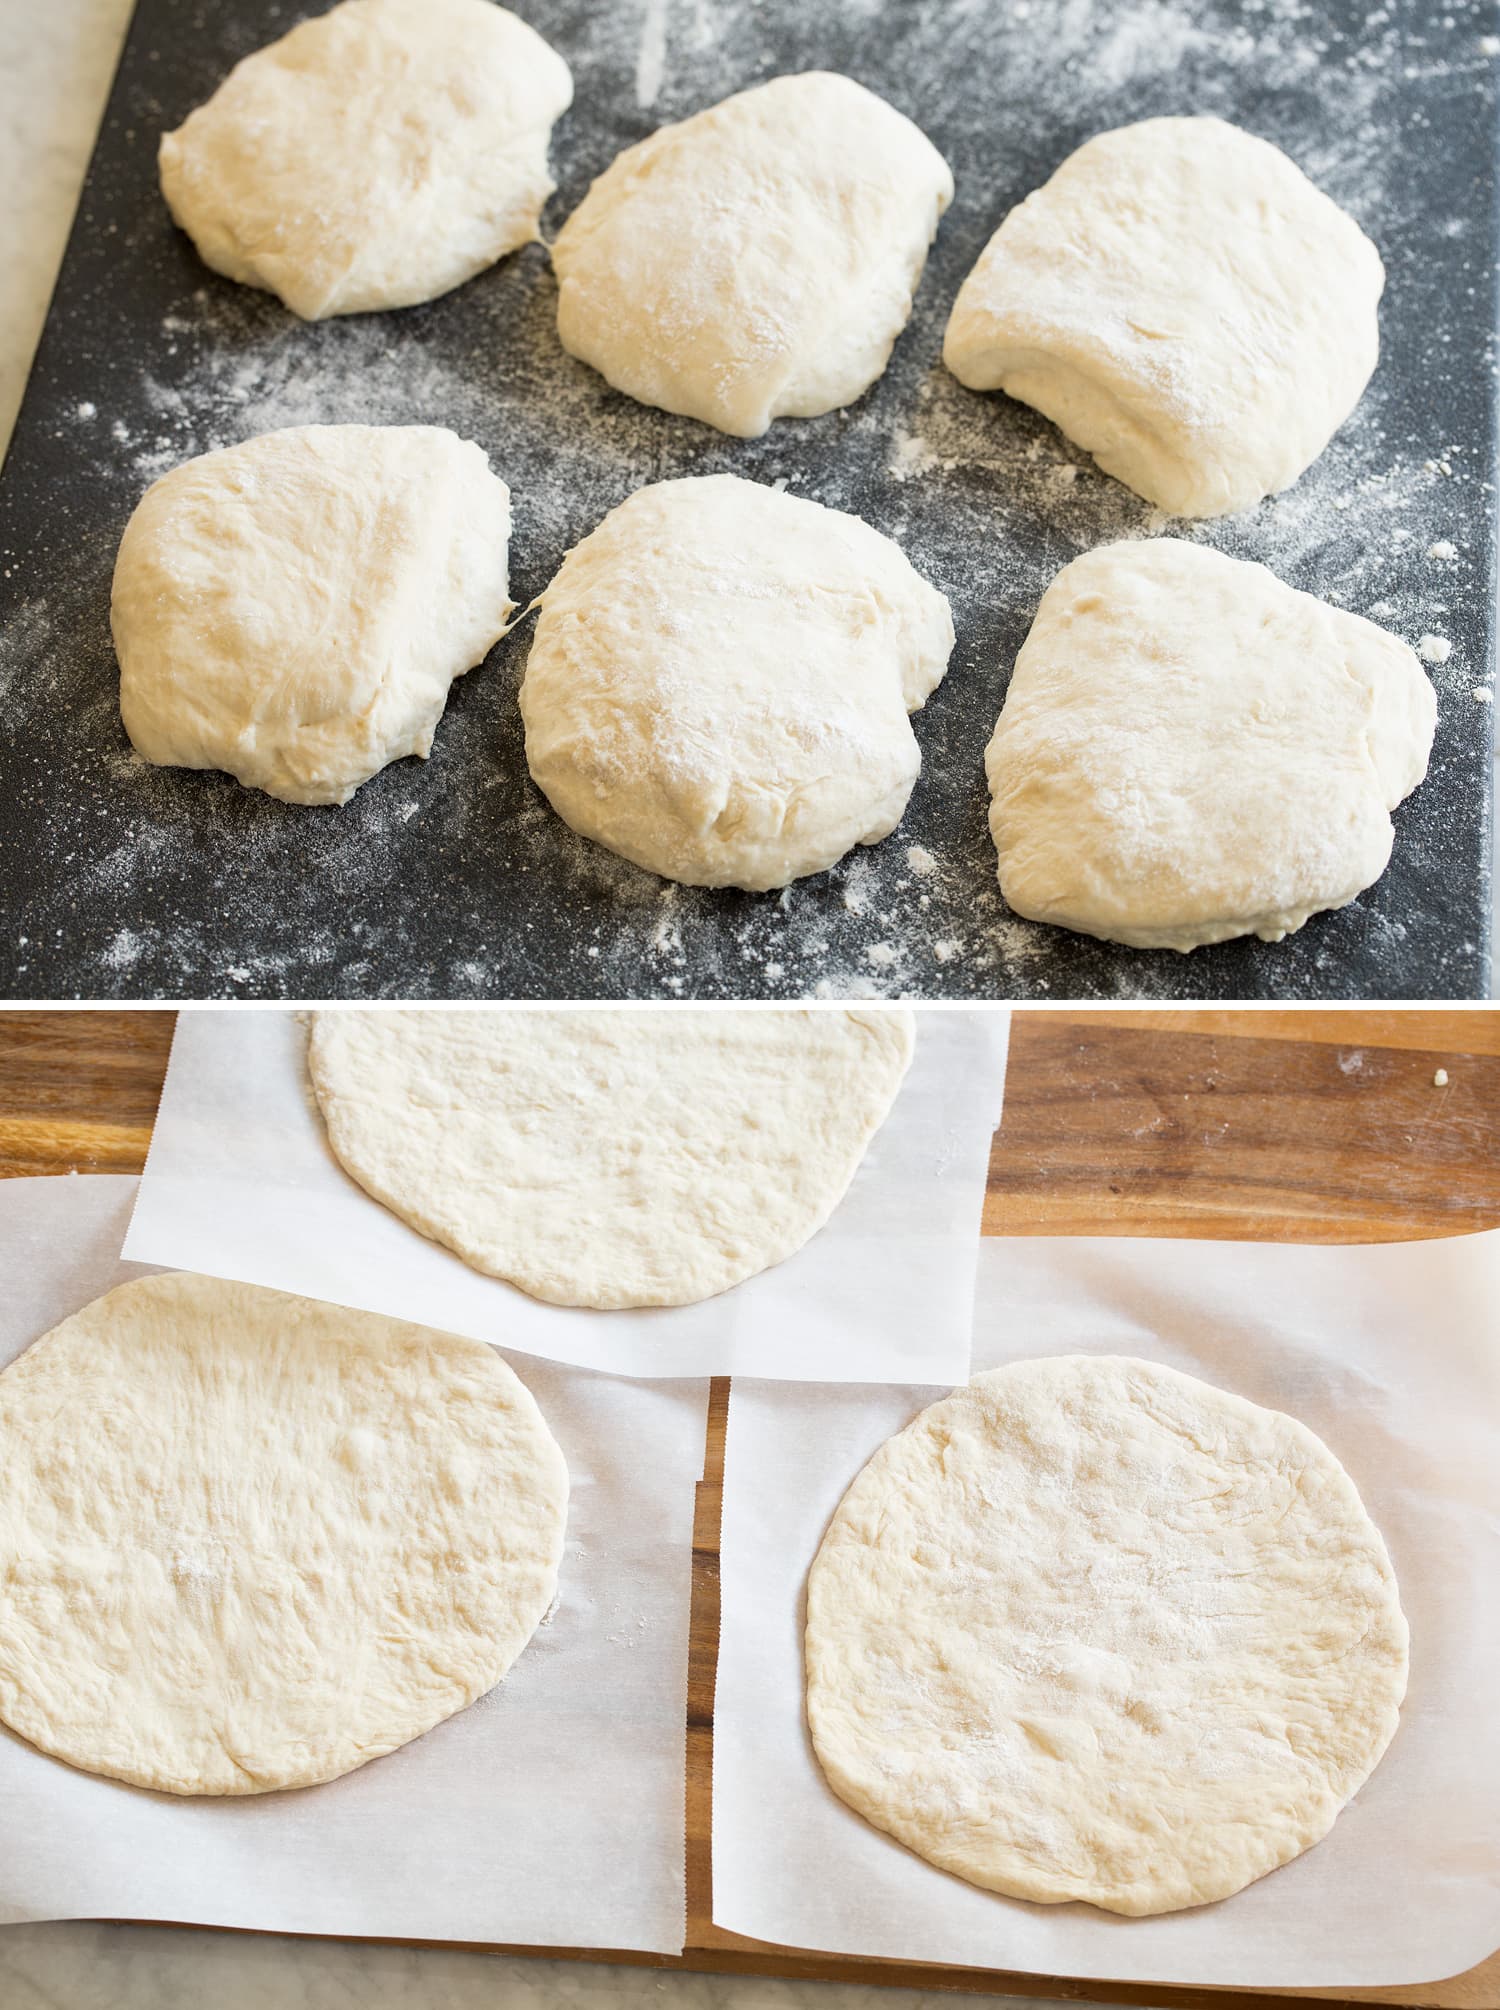 Pizza dough cut into six portions then shaped into rounds.